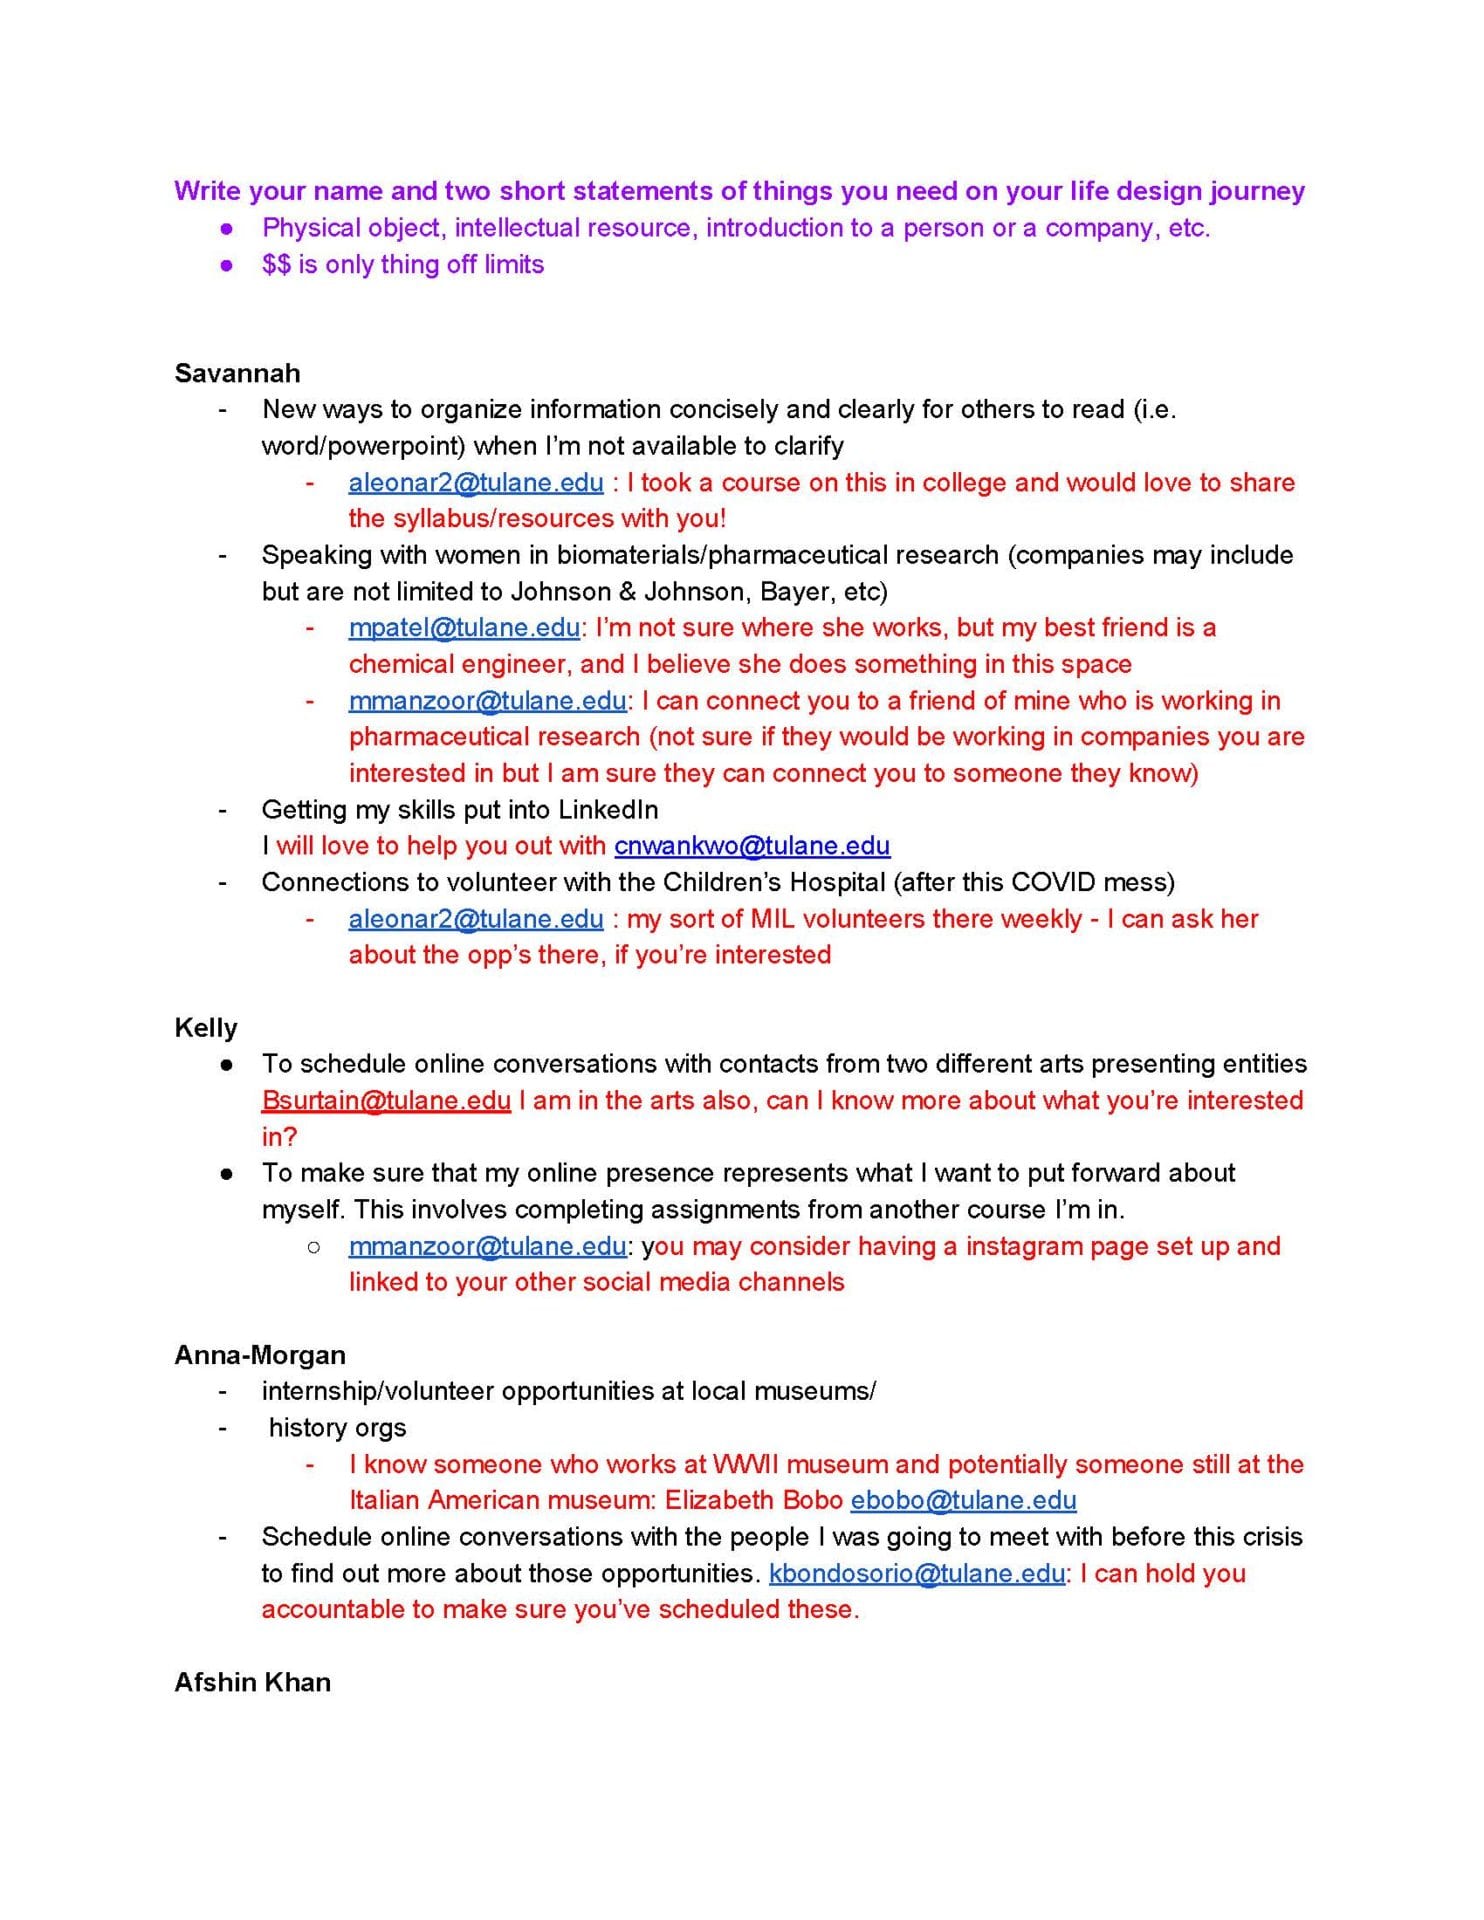 Screenshot of the google doc with different participants’ needs and referrals